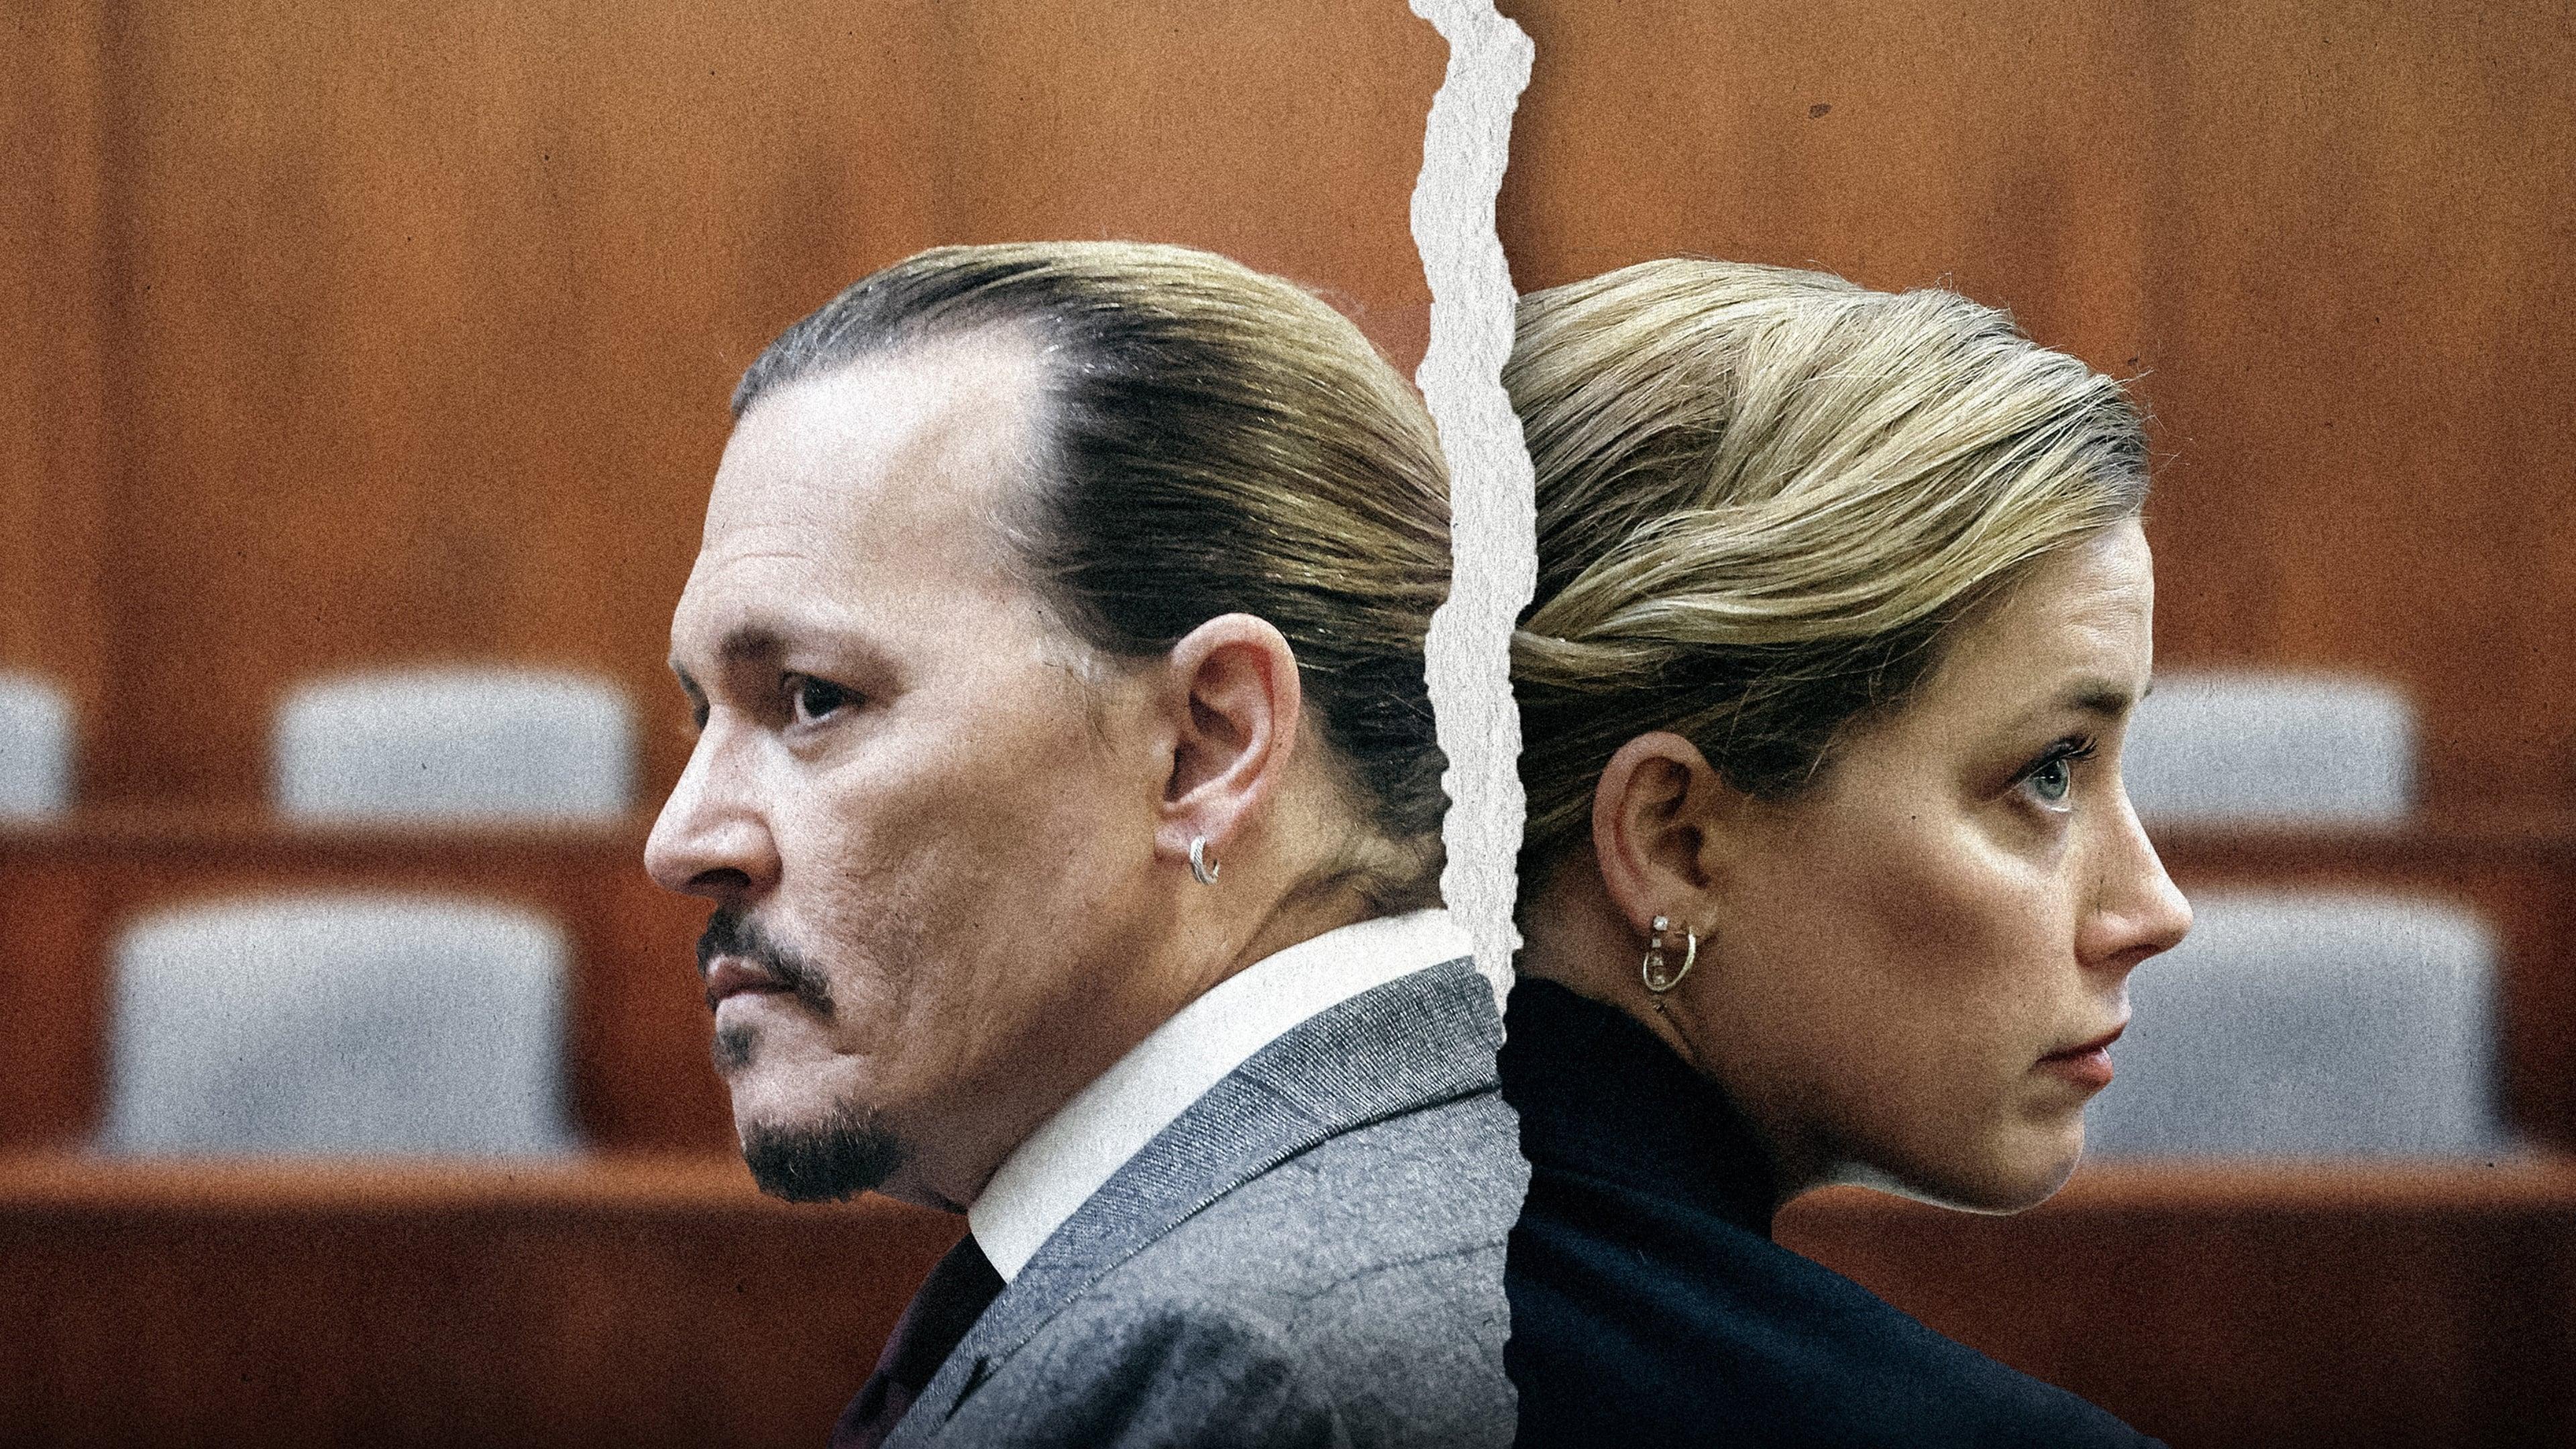 Johnny vs Amber: The US Trial backdrop